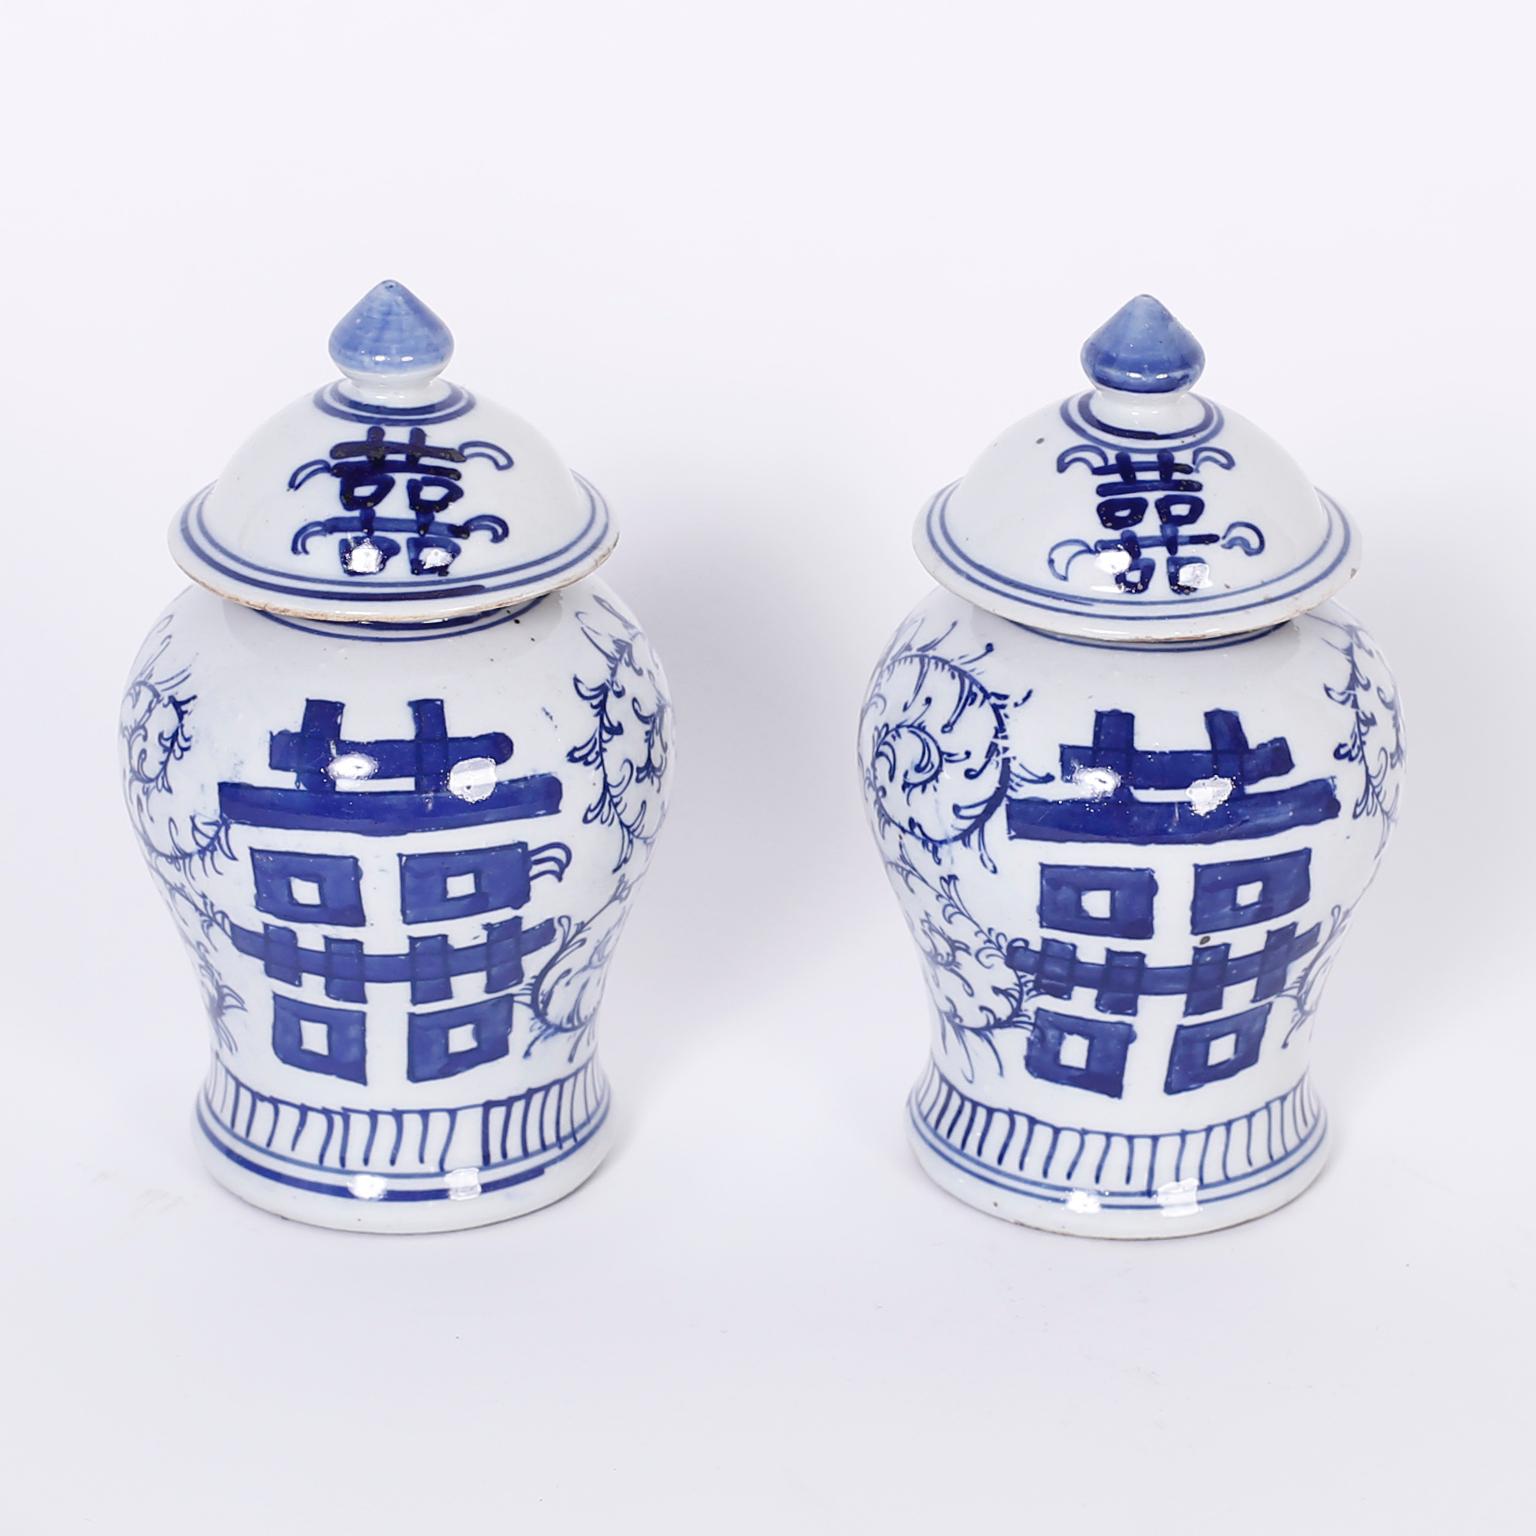 Chinese blue and white porcelain lidded jars with Classic form and decorated with the familiar joy and unity symbol of double happiness on the front and back.